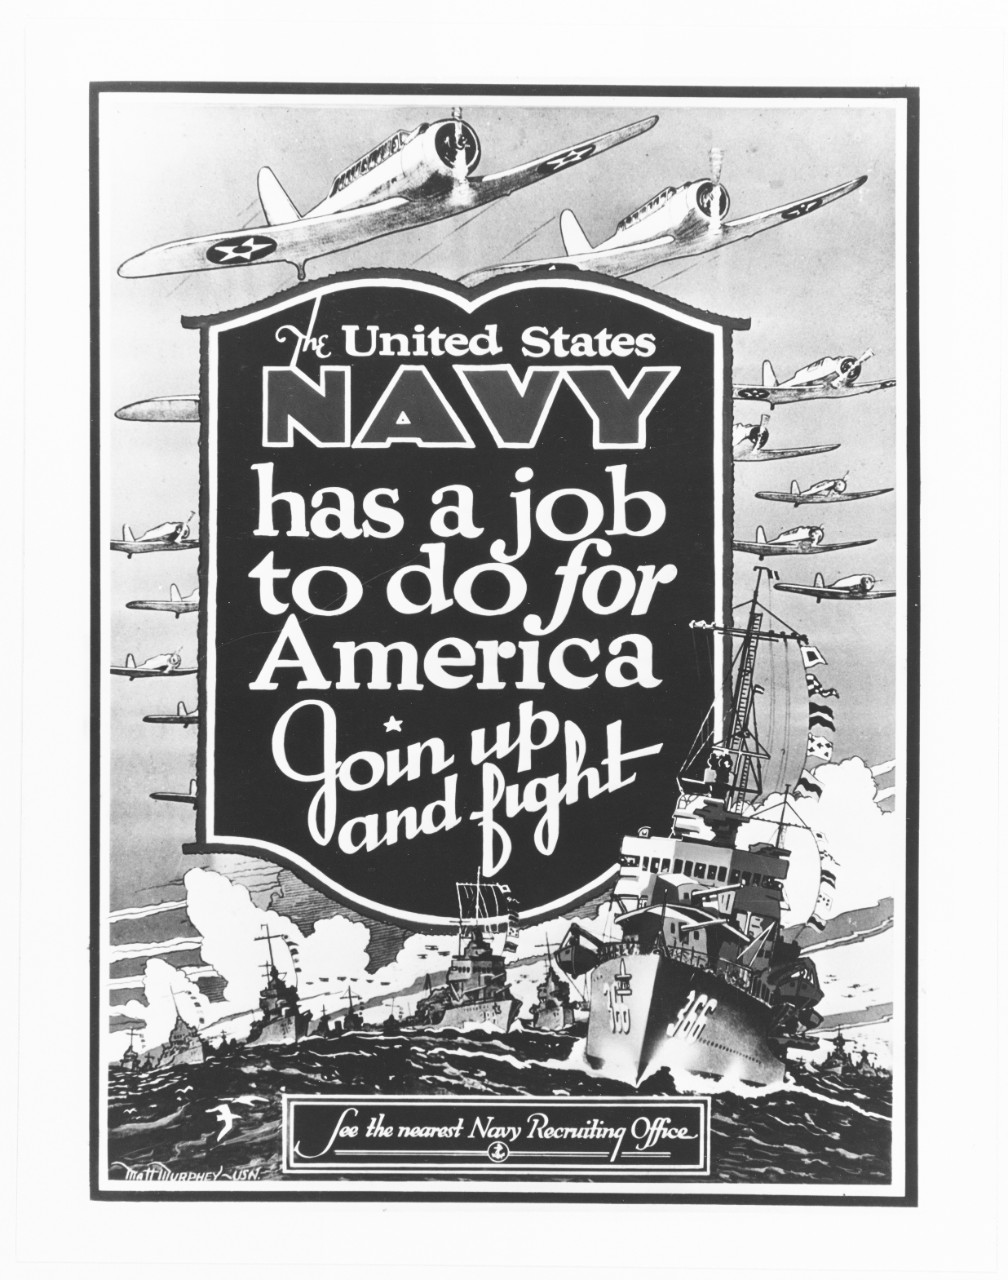 Photo #: NH 77227  &quot;The United States Navy has a job to do for America. Join up and fight&quot;